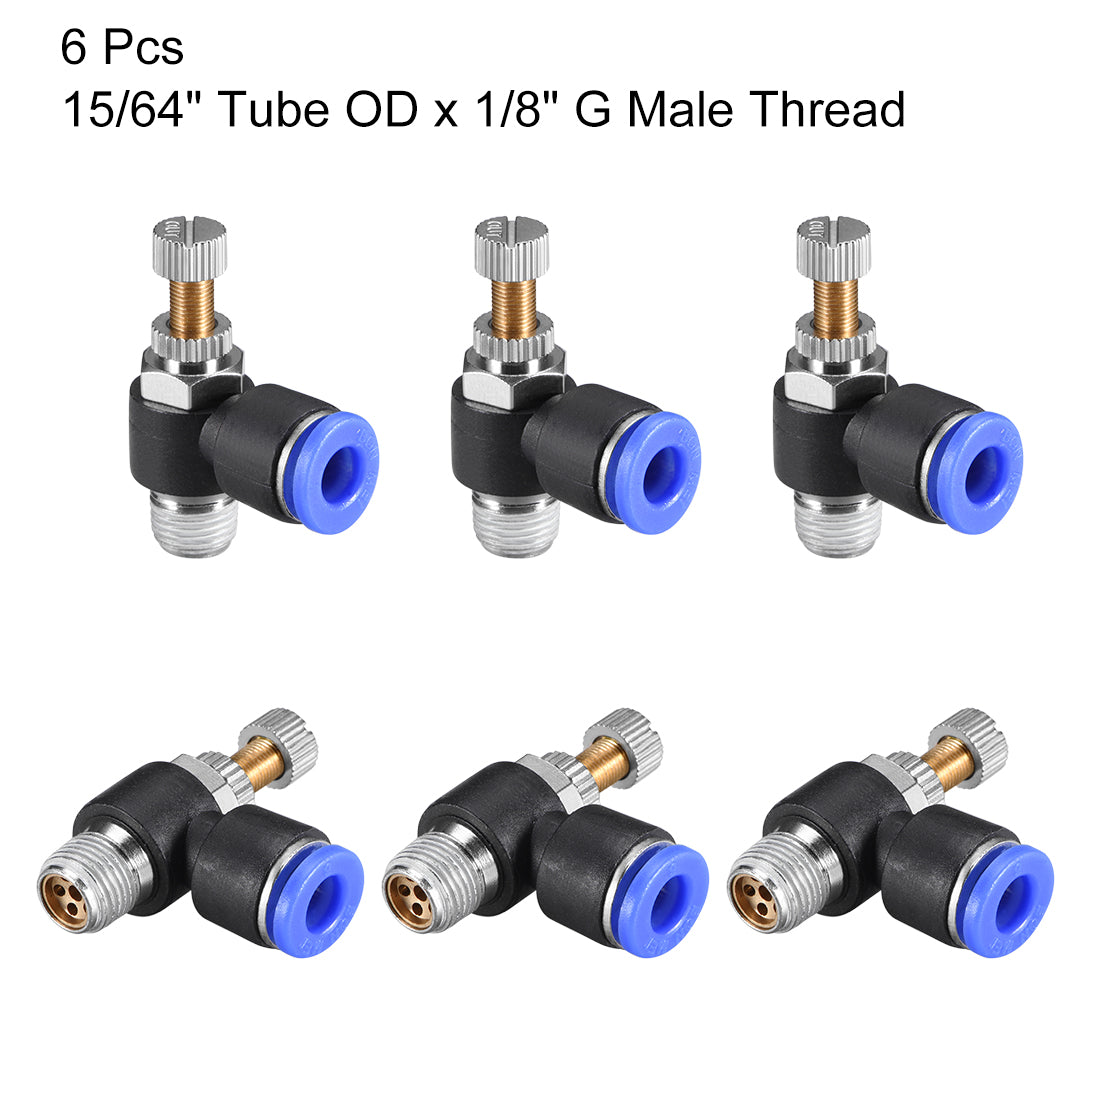 uxcell Uxcell Push-to-Connect Air Flow Control Valve, Elbow, 15/64" Tube OD x 1/8" G Male Thread Speed controller Valve Tube fitting Blue, 6pcs